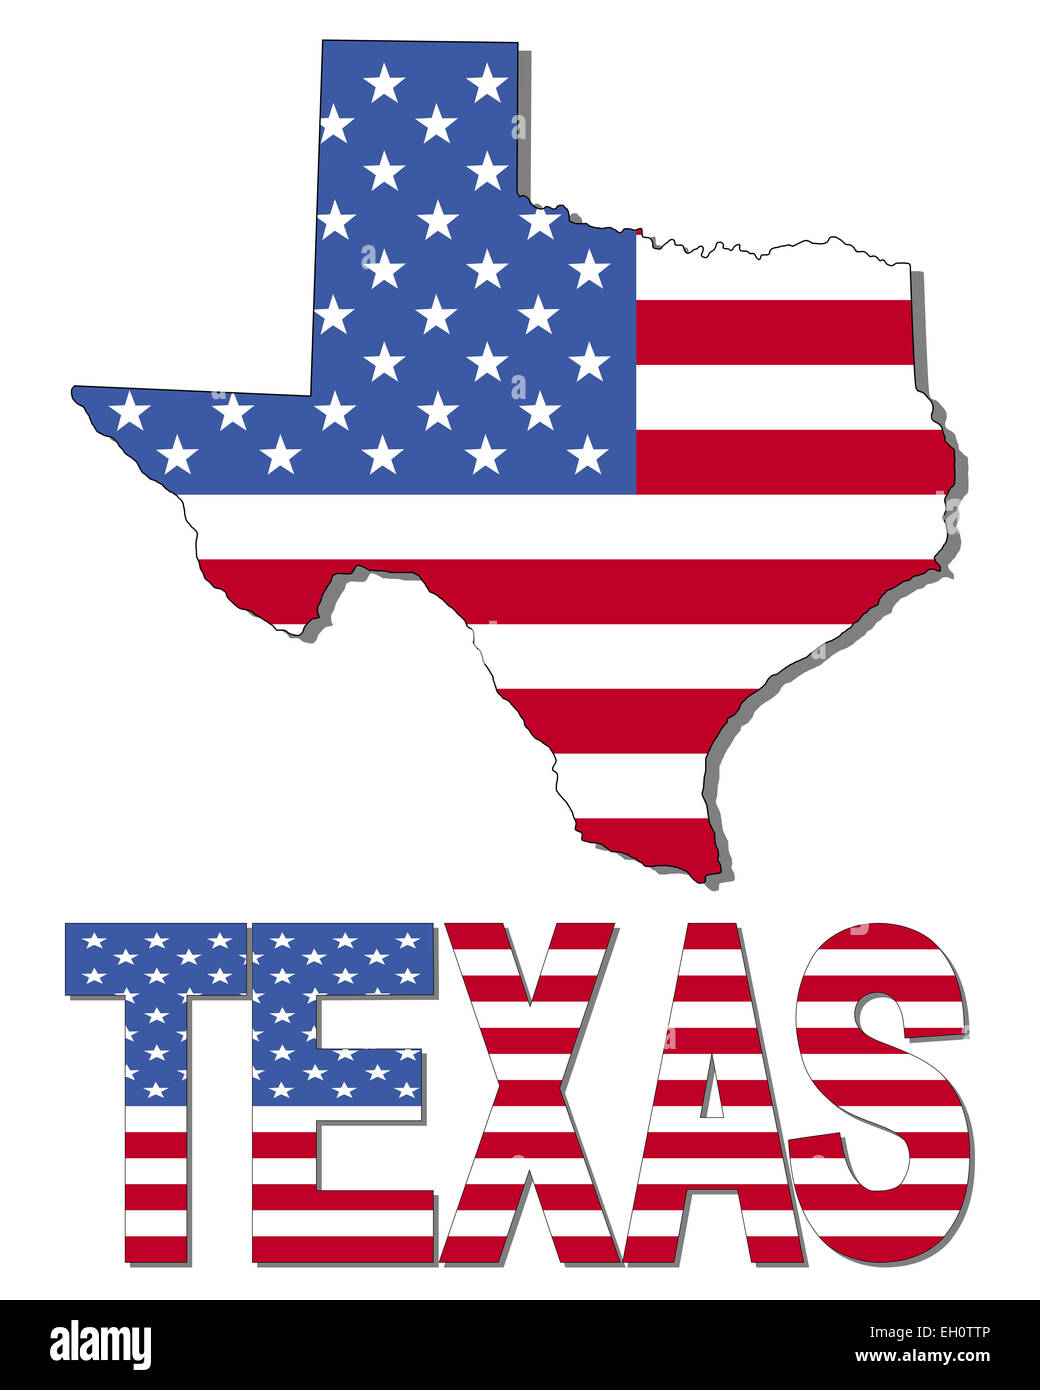 Texas map flag and text illustration Stock Photo